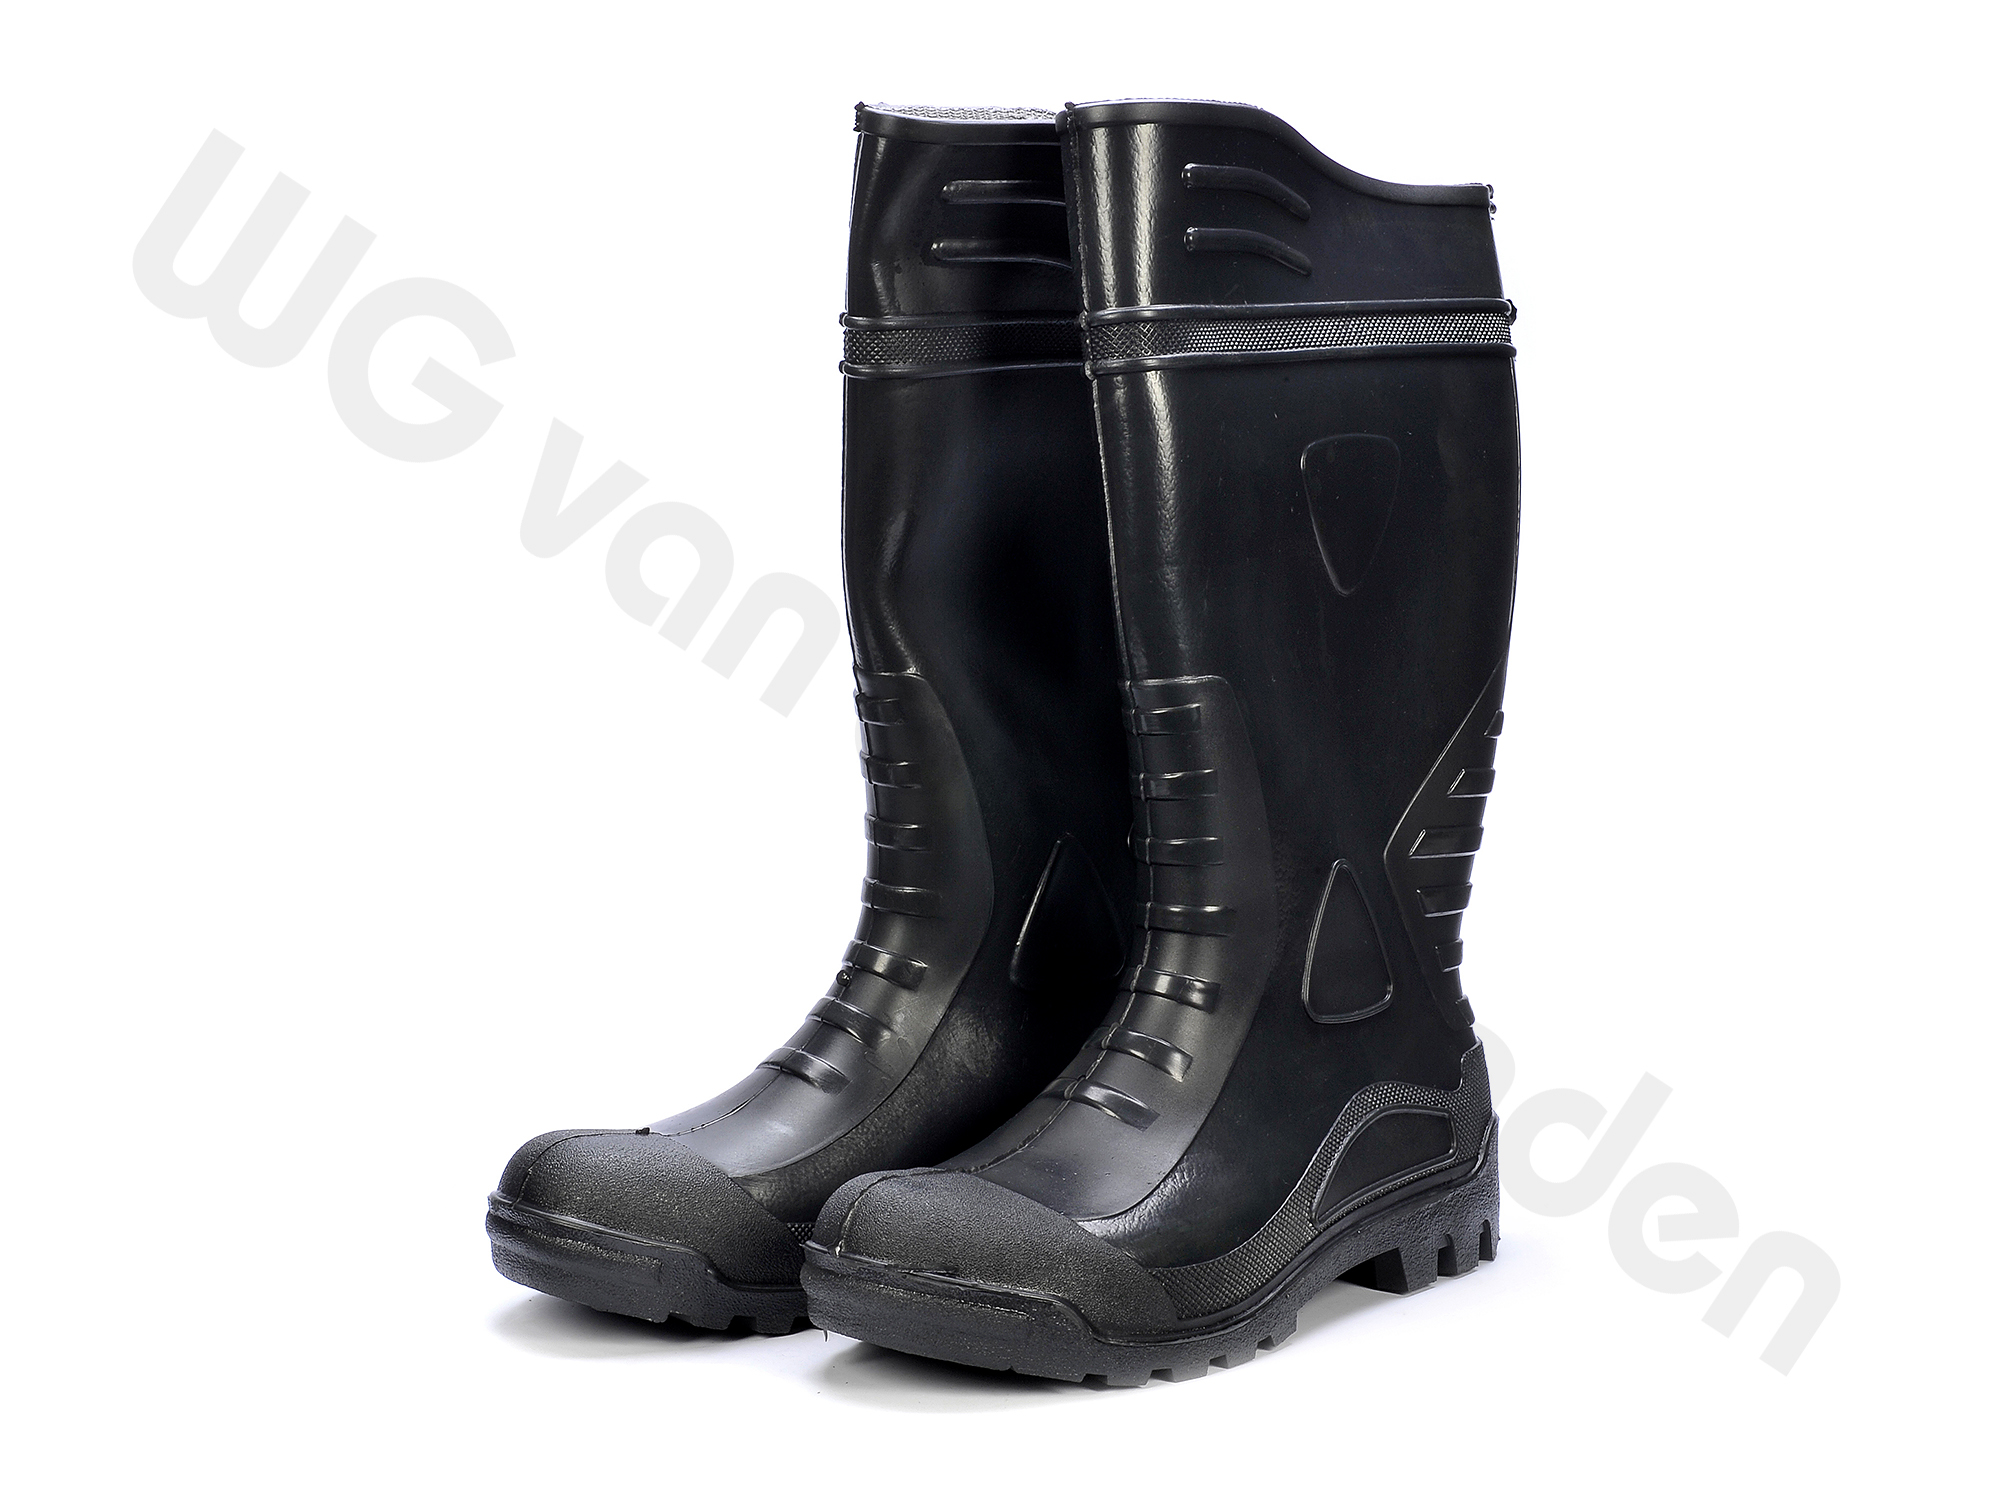 880203 BOOTS SAFETY S4 PVC WITH STEEL TOE SIZE 40/26CM CE